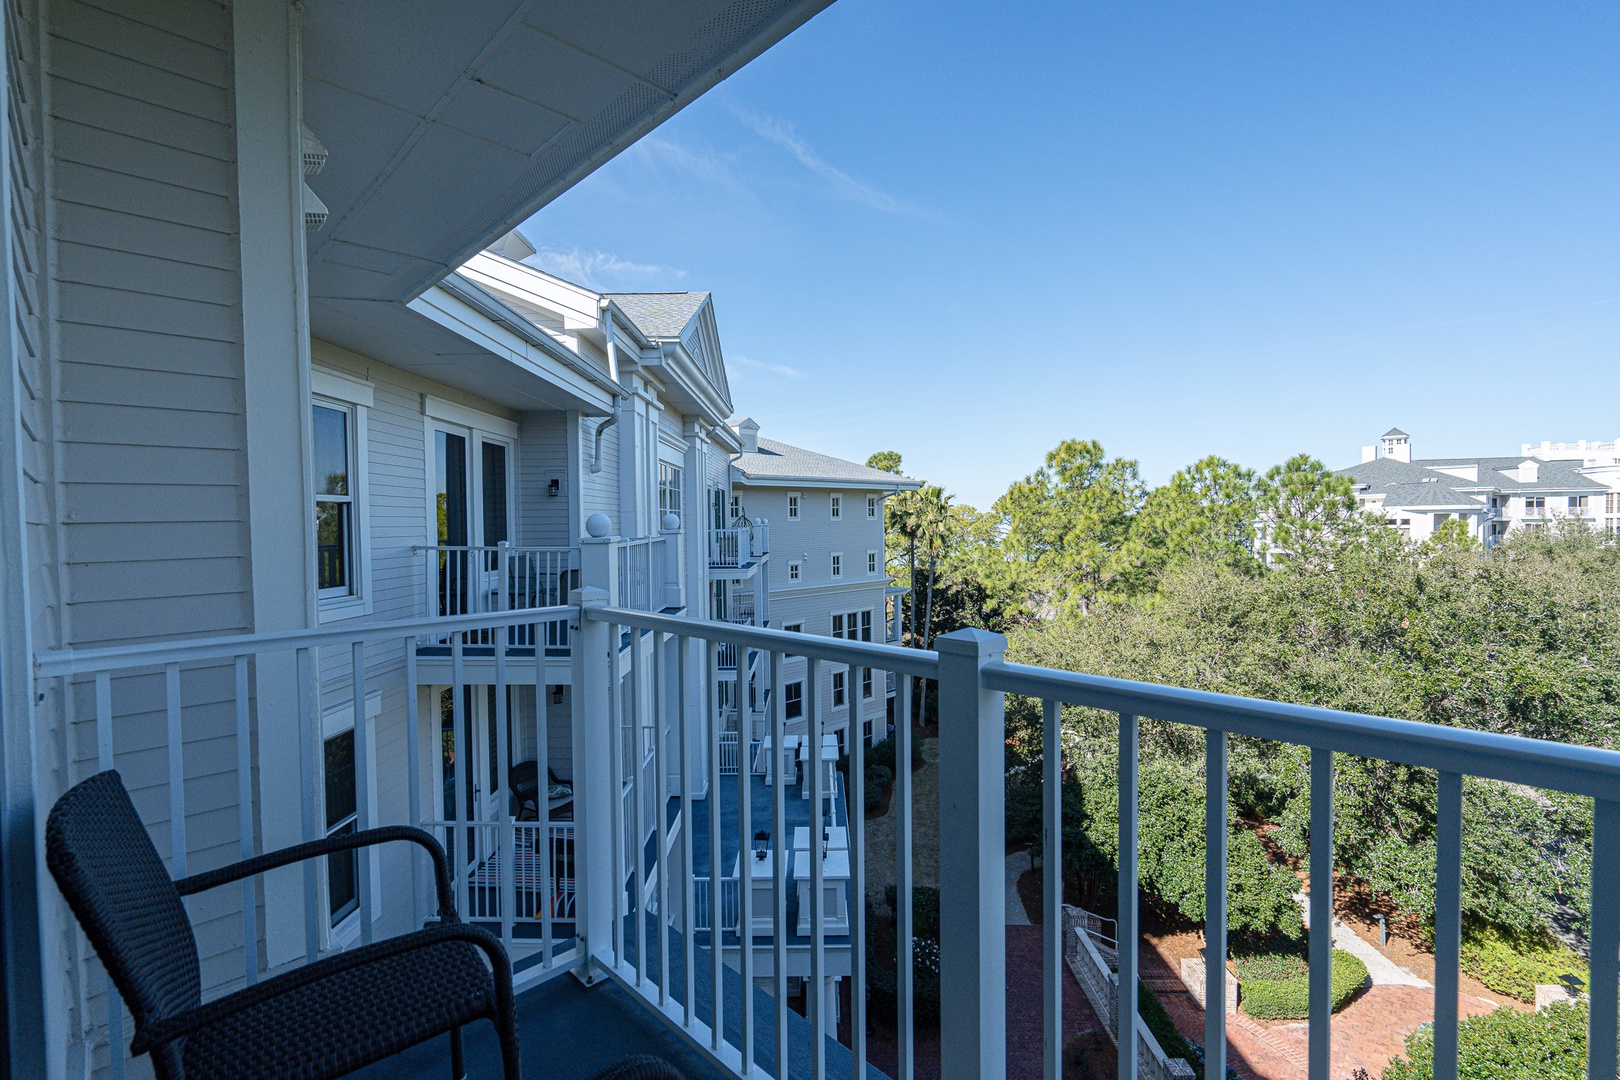 Sip morning coffee or enjoy an evening beverage on the breezy balcony